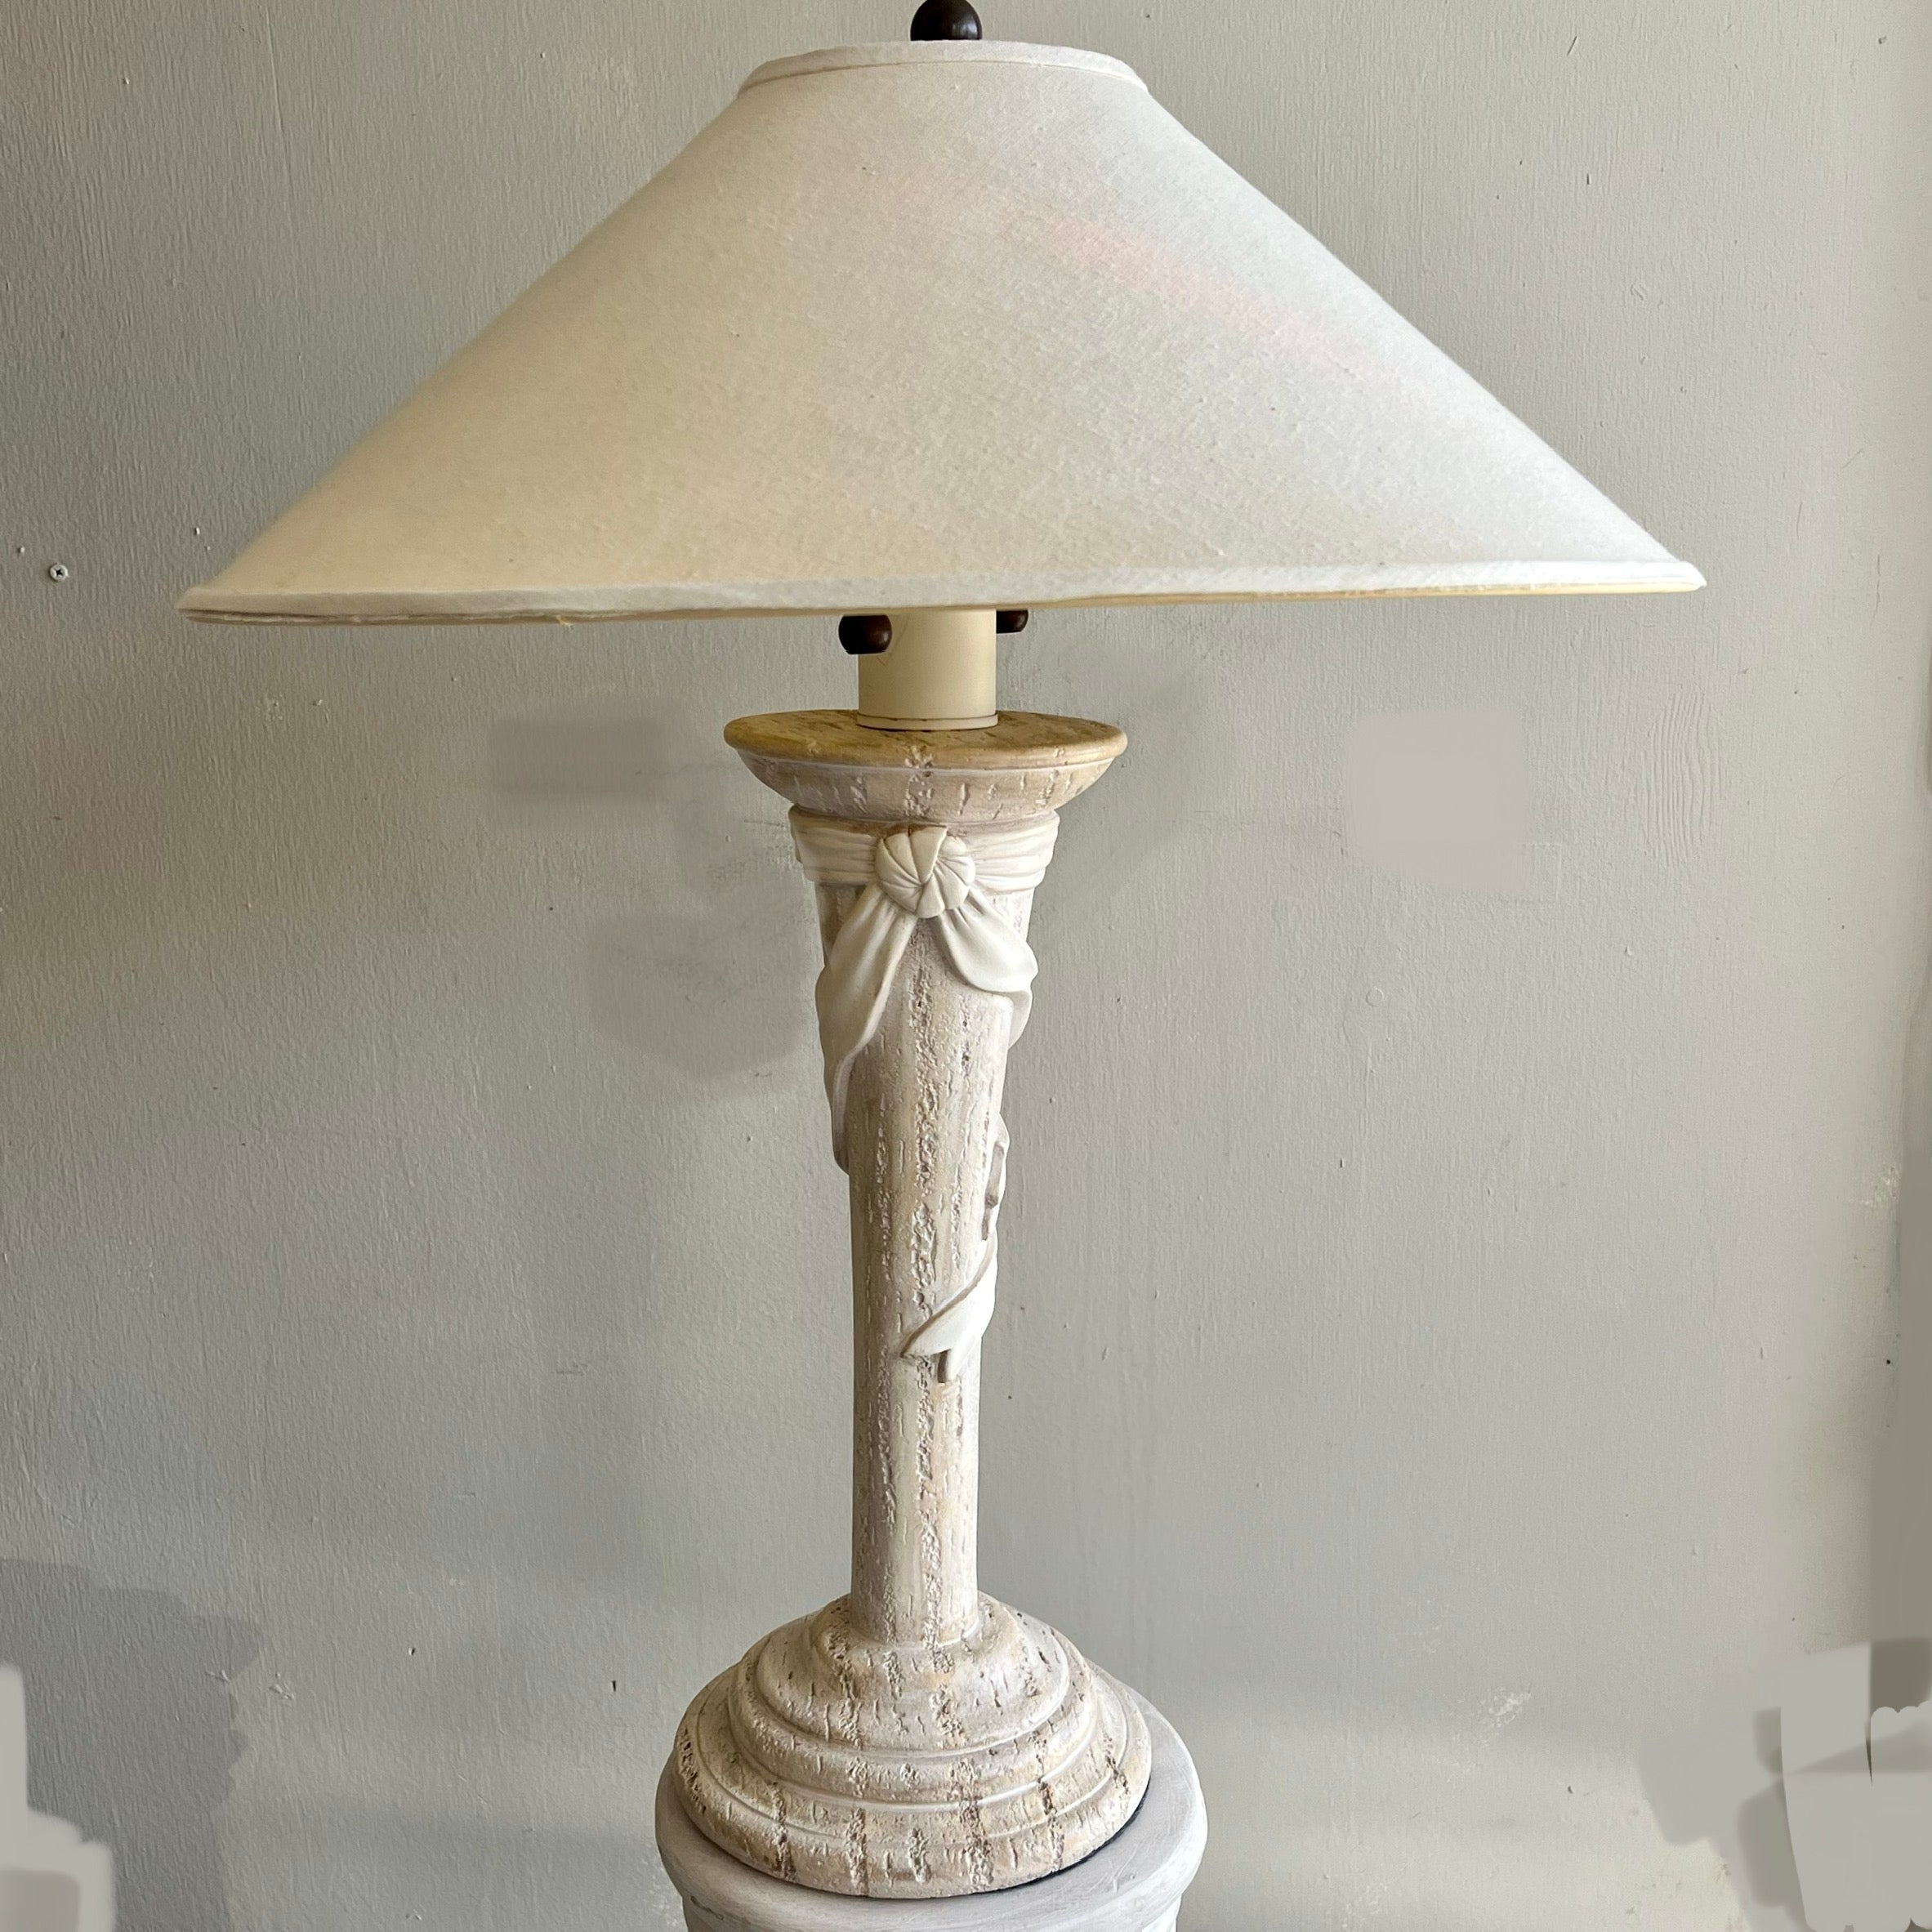 Exquisite sculptural plaster table lamp tied with a “ribbon.” Faux travertine plaster and fine detailing. Excellent condition. The included lampshade has a few ridges but can easily be replaced if desired. Has two bulb sockets, each with their own